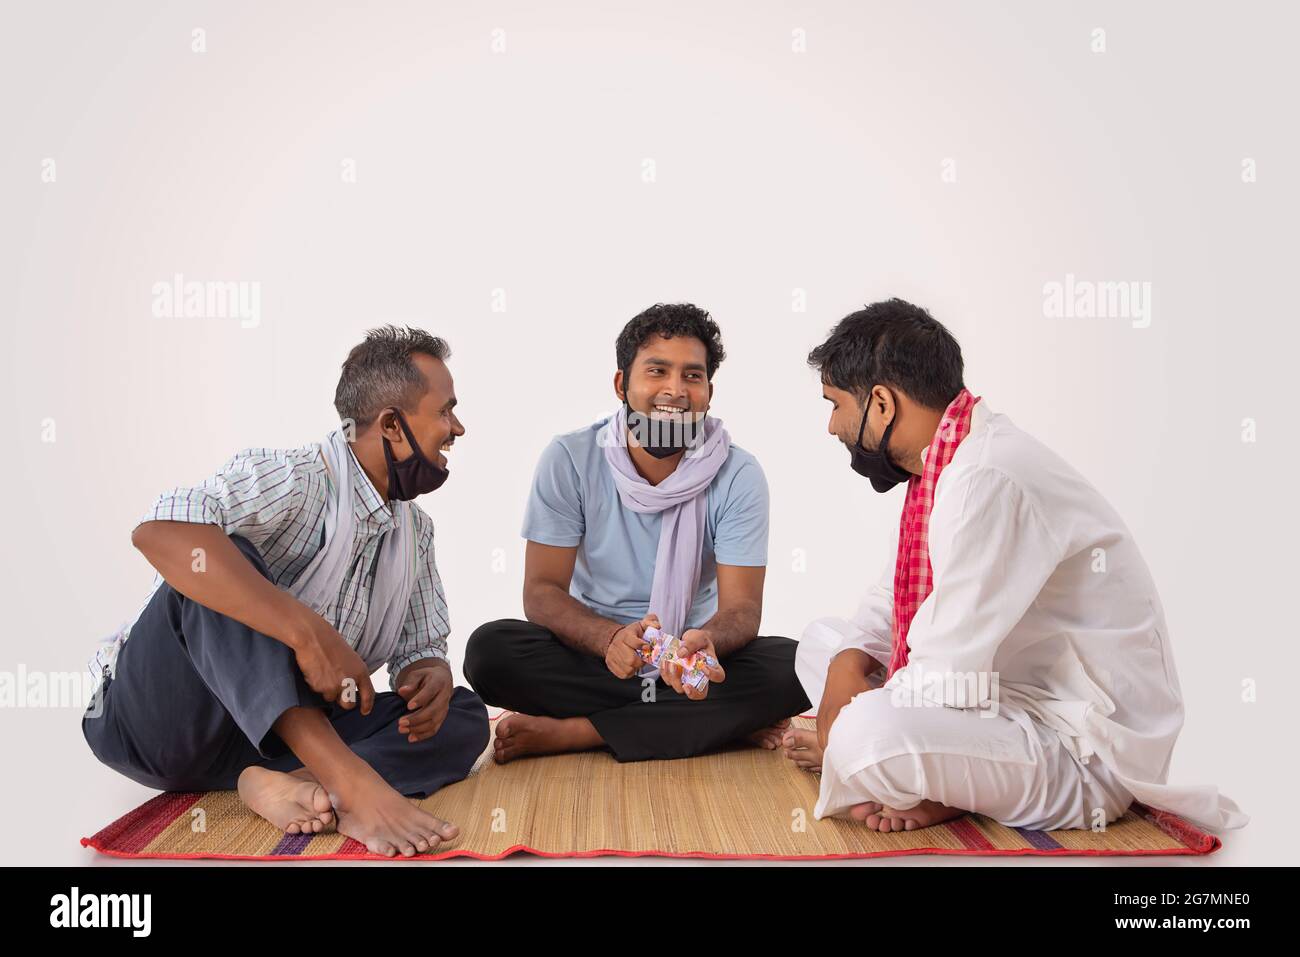 COMMON PEOPLE SITTING TOGETHER AND LOOKING AT EACH OTHER WHILE PLAYING CARDS Stock Photo